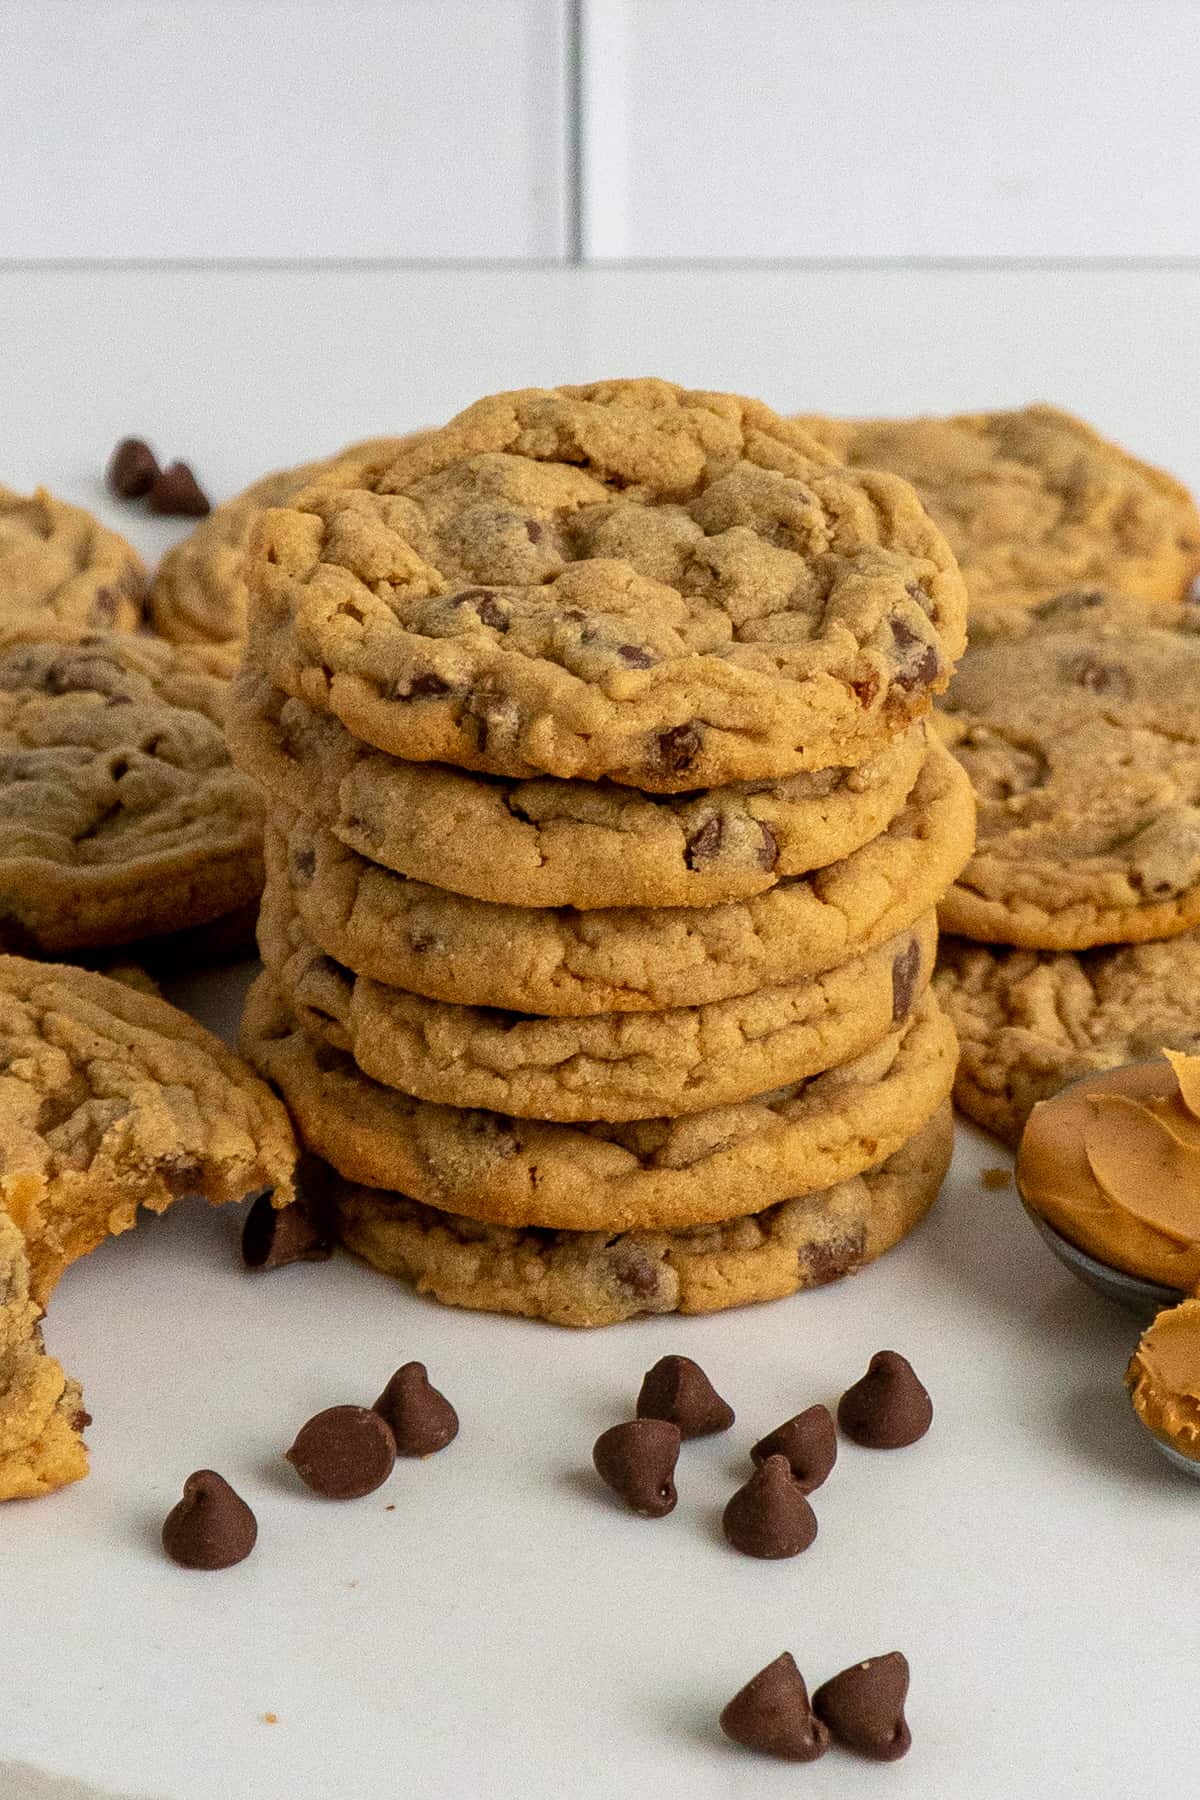 Six peanut butter chocolate chip cookies stacked on top of each other.